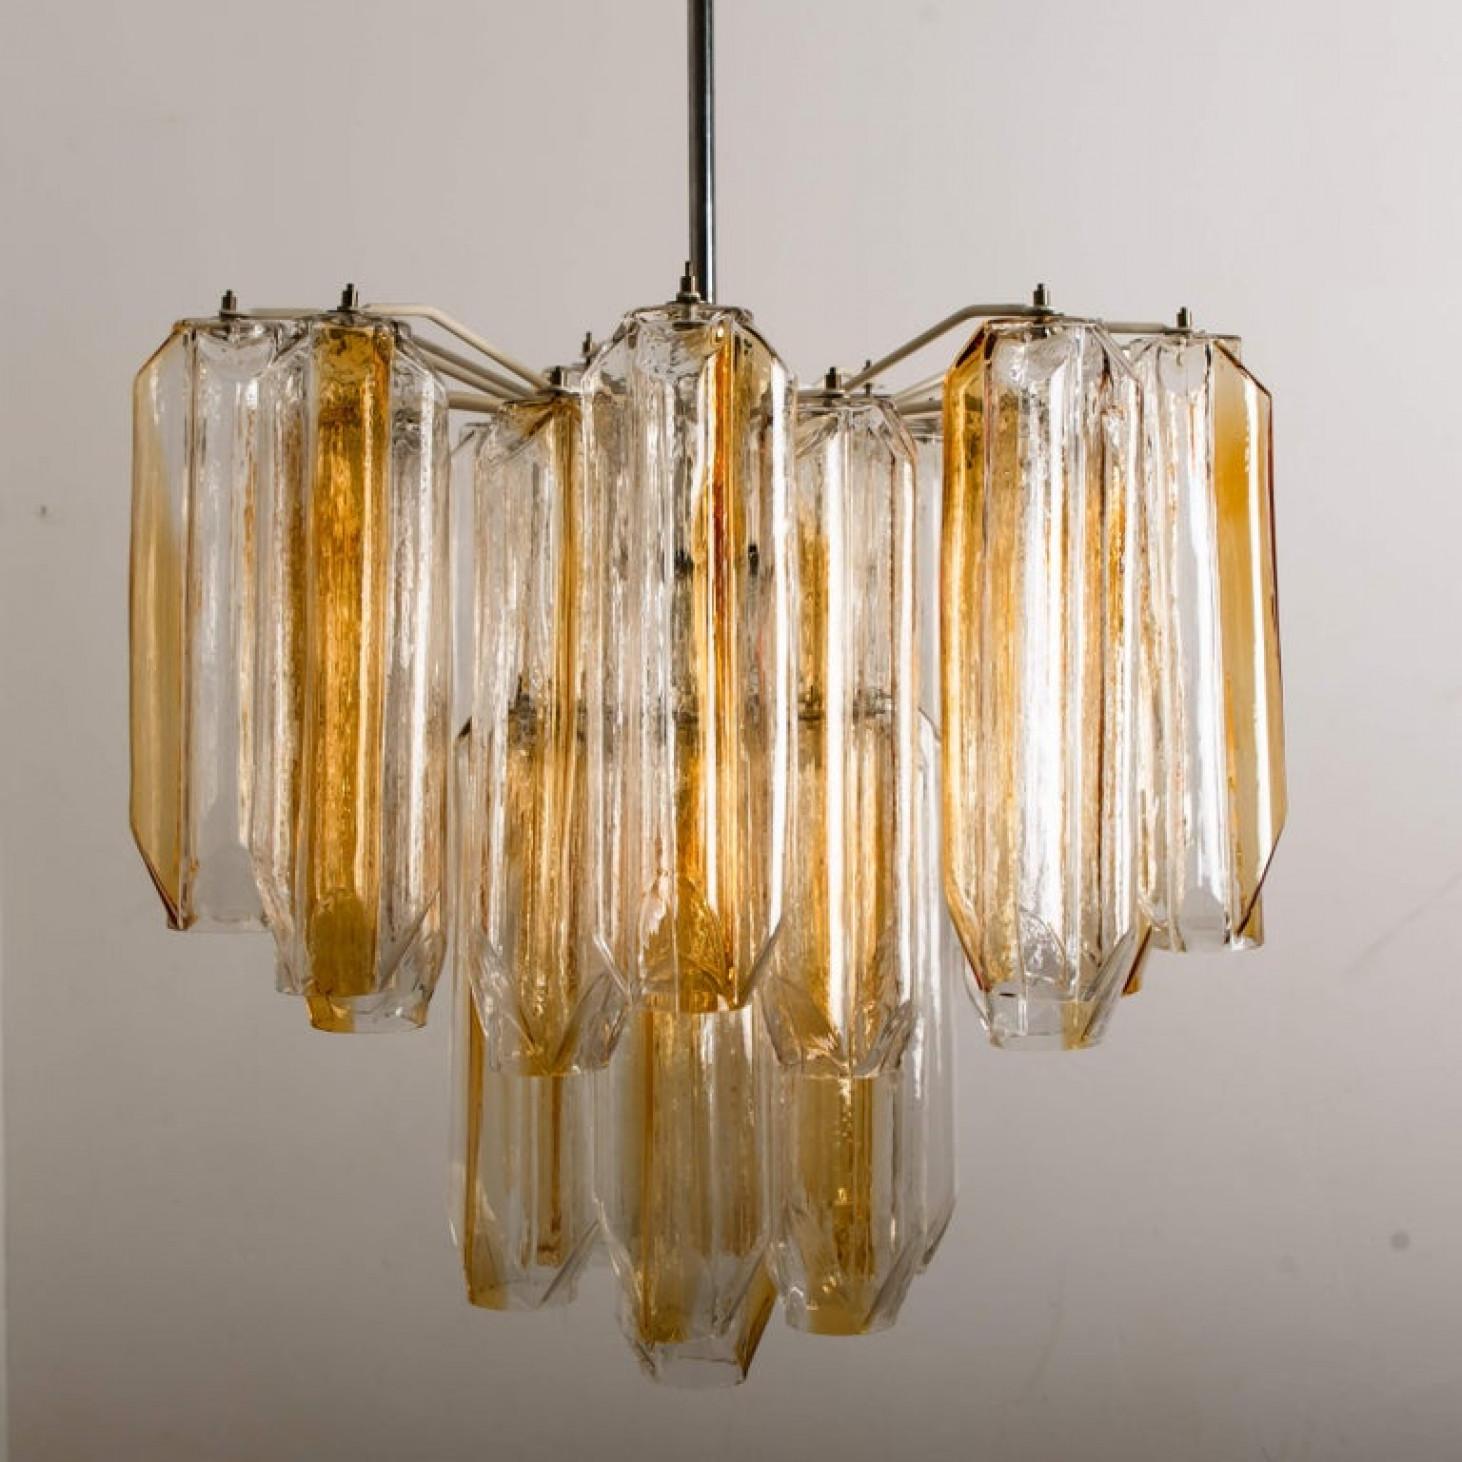 20th Century Clear and Orange/Amber Angled Glass Tubes Chandelier by J.T. Kalmar For Sale